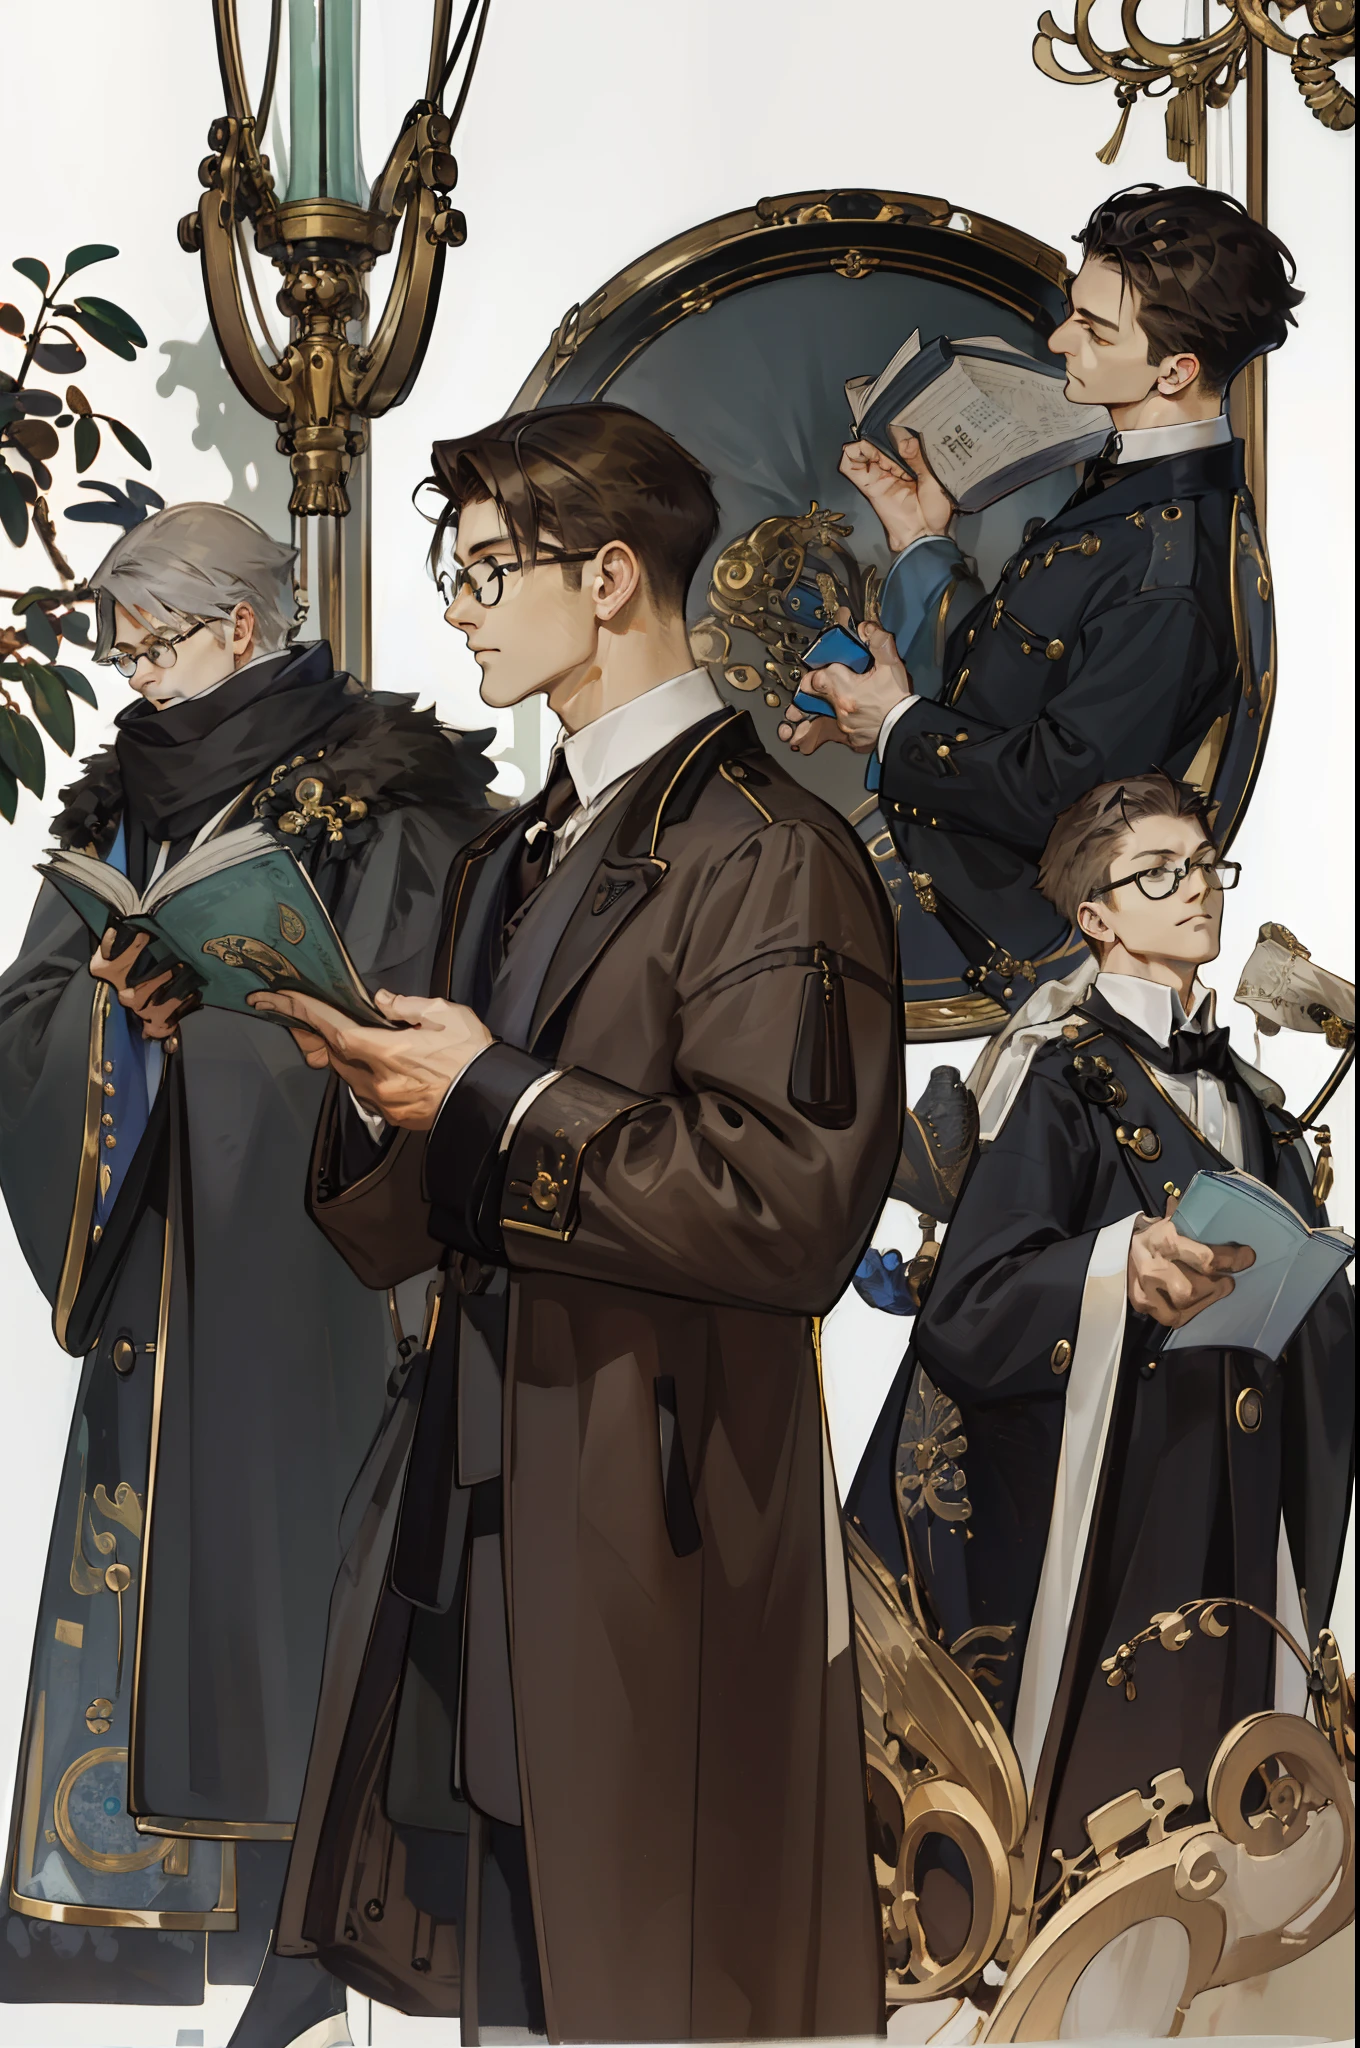 (((absurderes、hight resolution、Ultra-detail)))、(1male people、solo：１.9、Adults、Slender men、Wearing round lens glasses、)、Gentlemanly men、brown haired、Gray eyes、(shorth hair、dishevled hair、long limbodel body type)、tatteredclothing、（（（Large coat。）））long court。Classic fashion、Young adolescents、darkened room、Best light and shadow、oud、Fine dust、concentrating、Reading、depth of fields、extra detailed face、nerdy、cowboy  shot